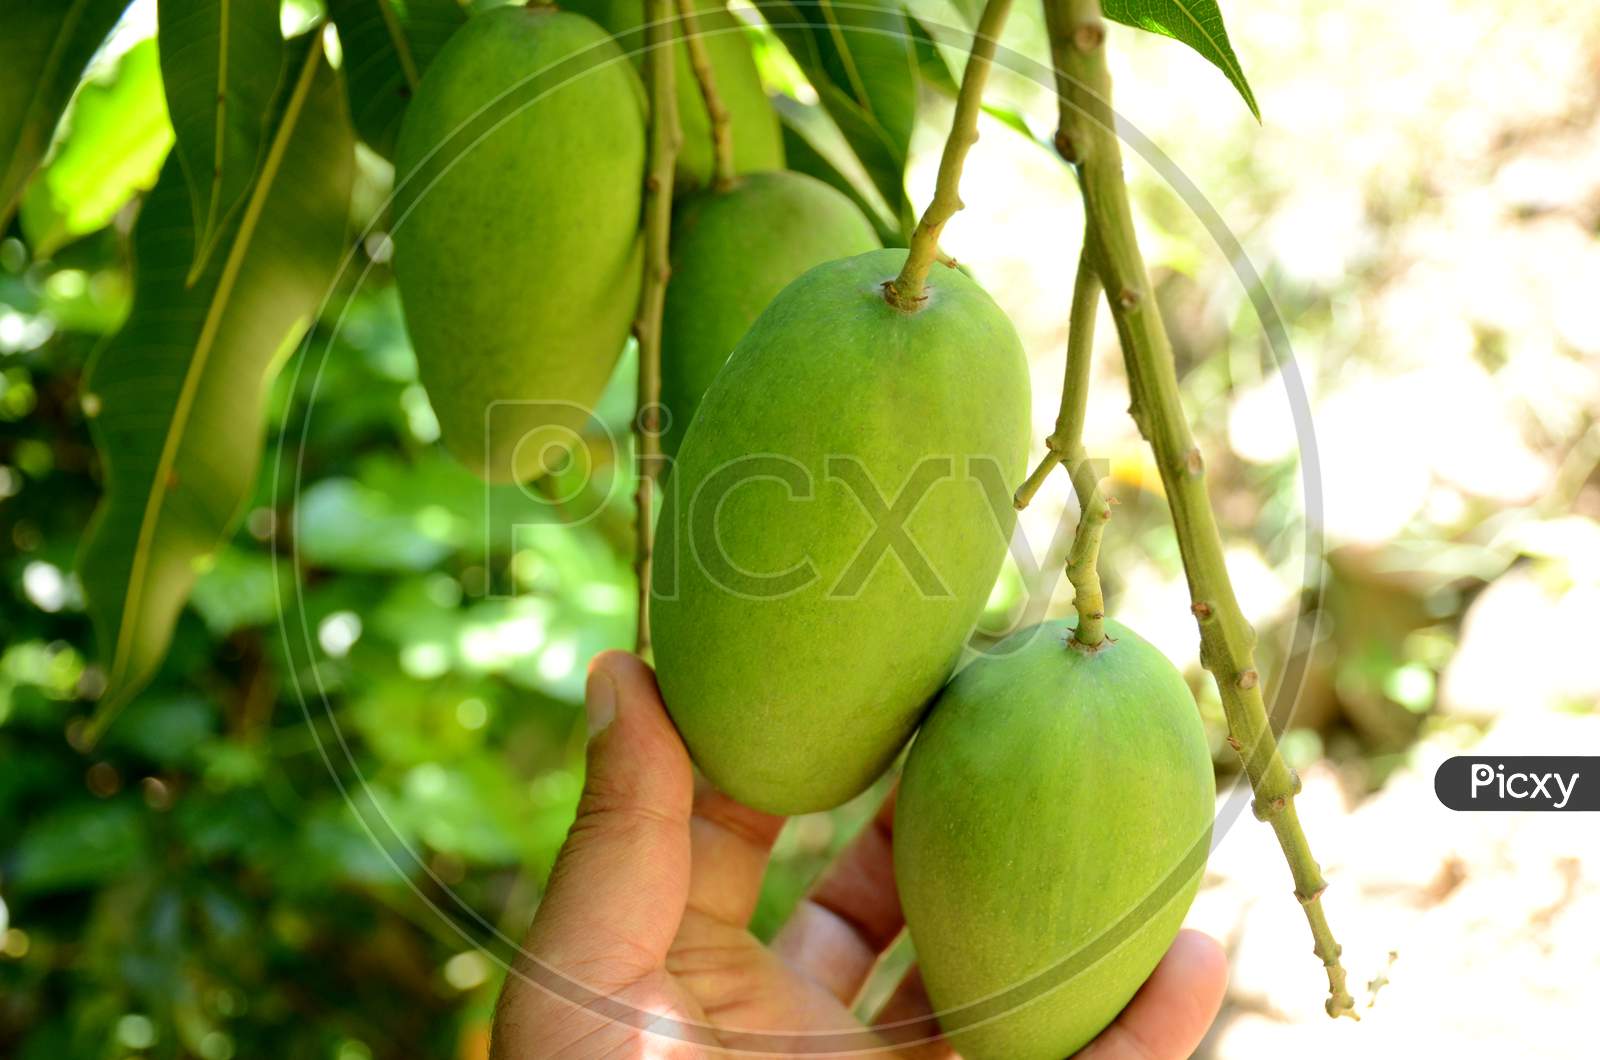 Closeup The Bunch Ripe Green Mango Fruit With Branch With Leaves Hold Hand Over Out Of Focus Green Brown Background.